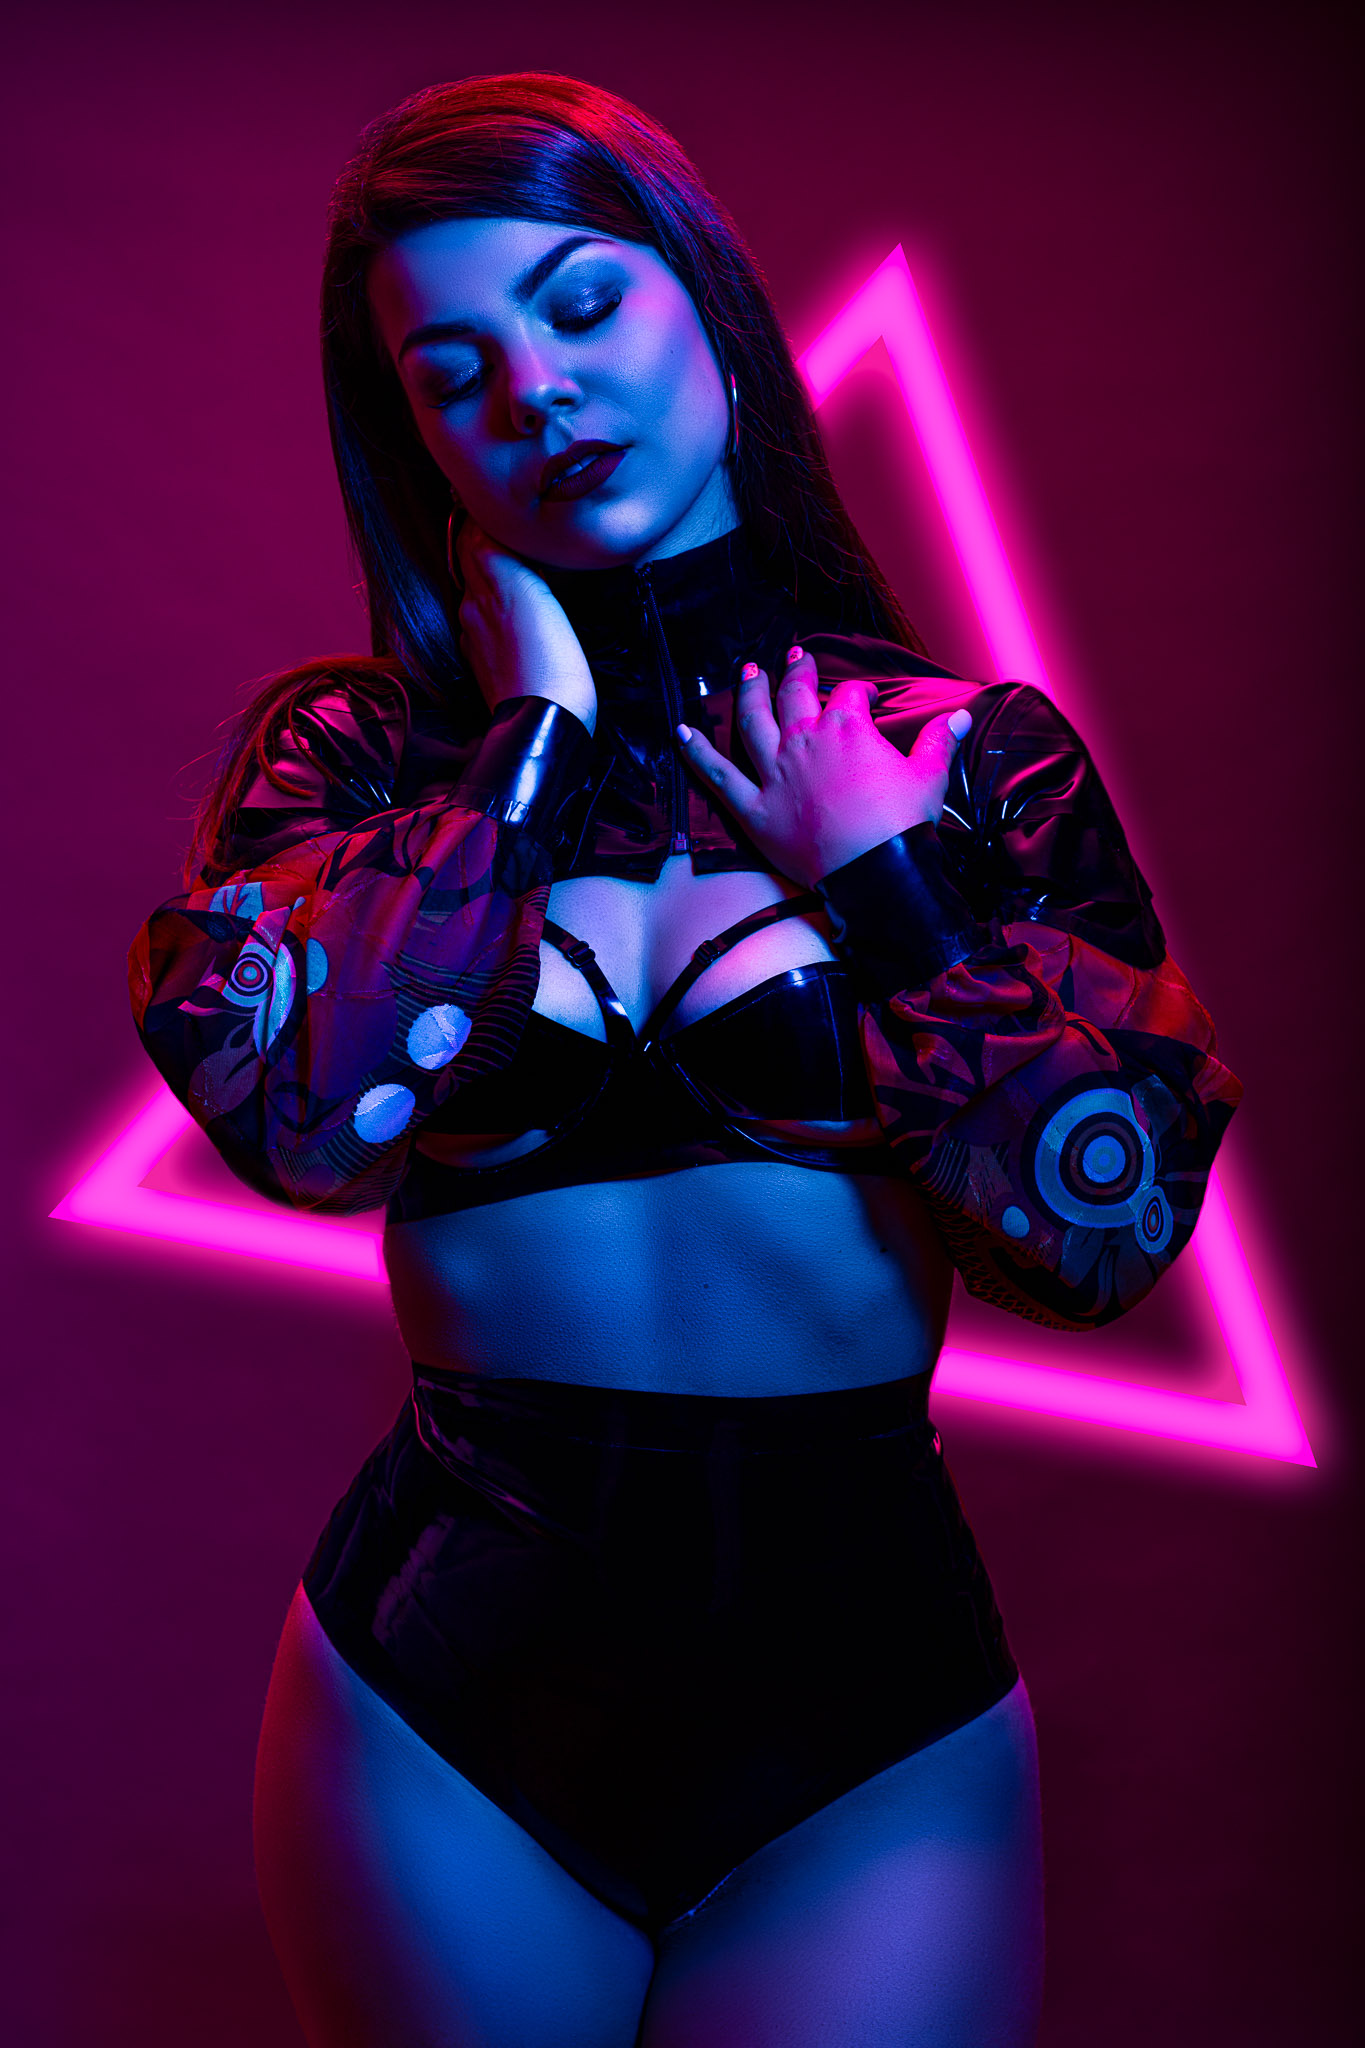 Cool Latex, Cool Color Gel Lights & Model Axelle